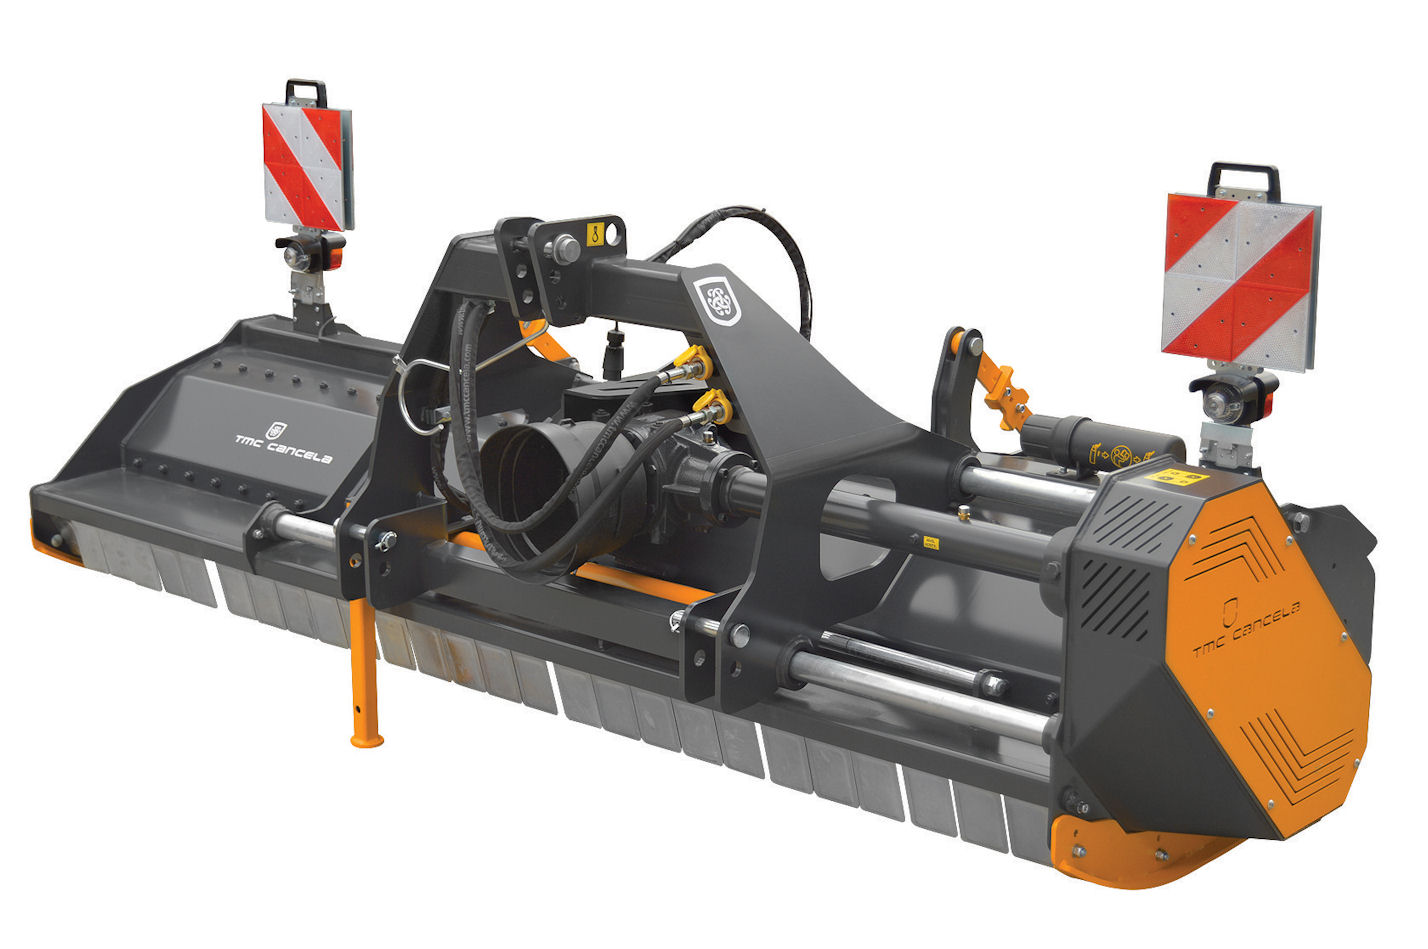 The TMC Cancela TJL-280 flail mulching topper from Spaldings has hydraulic side-shift.